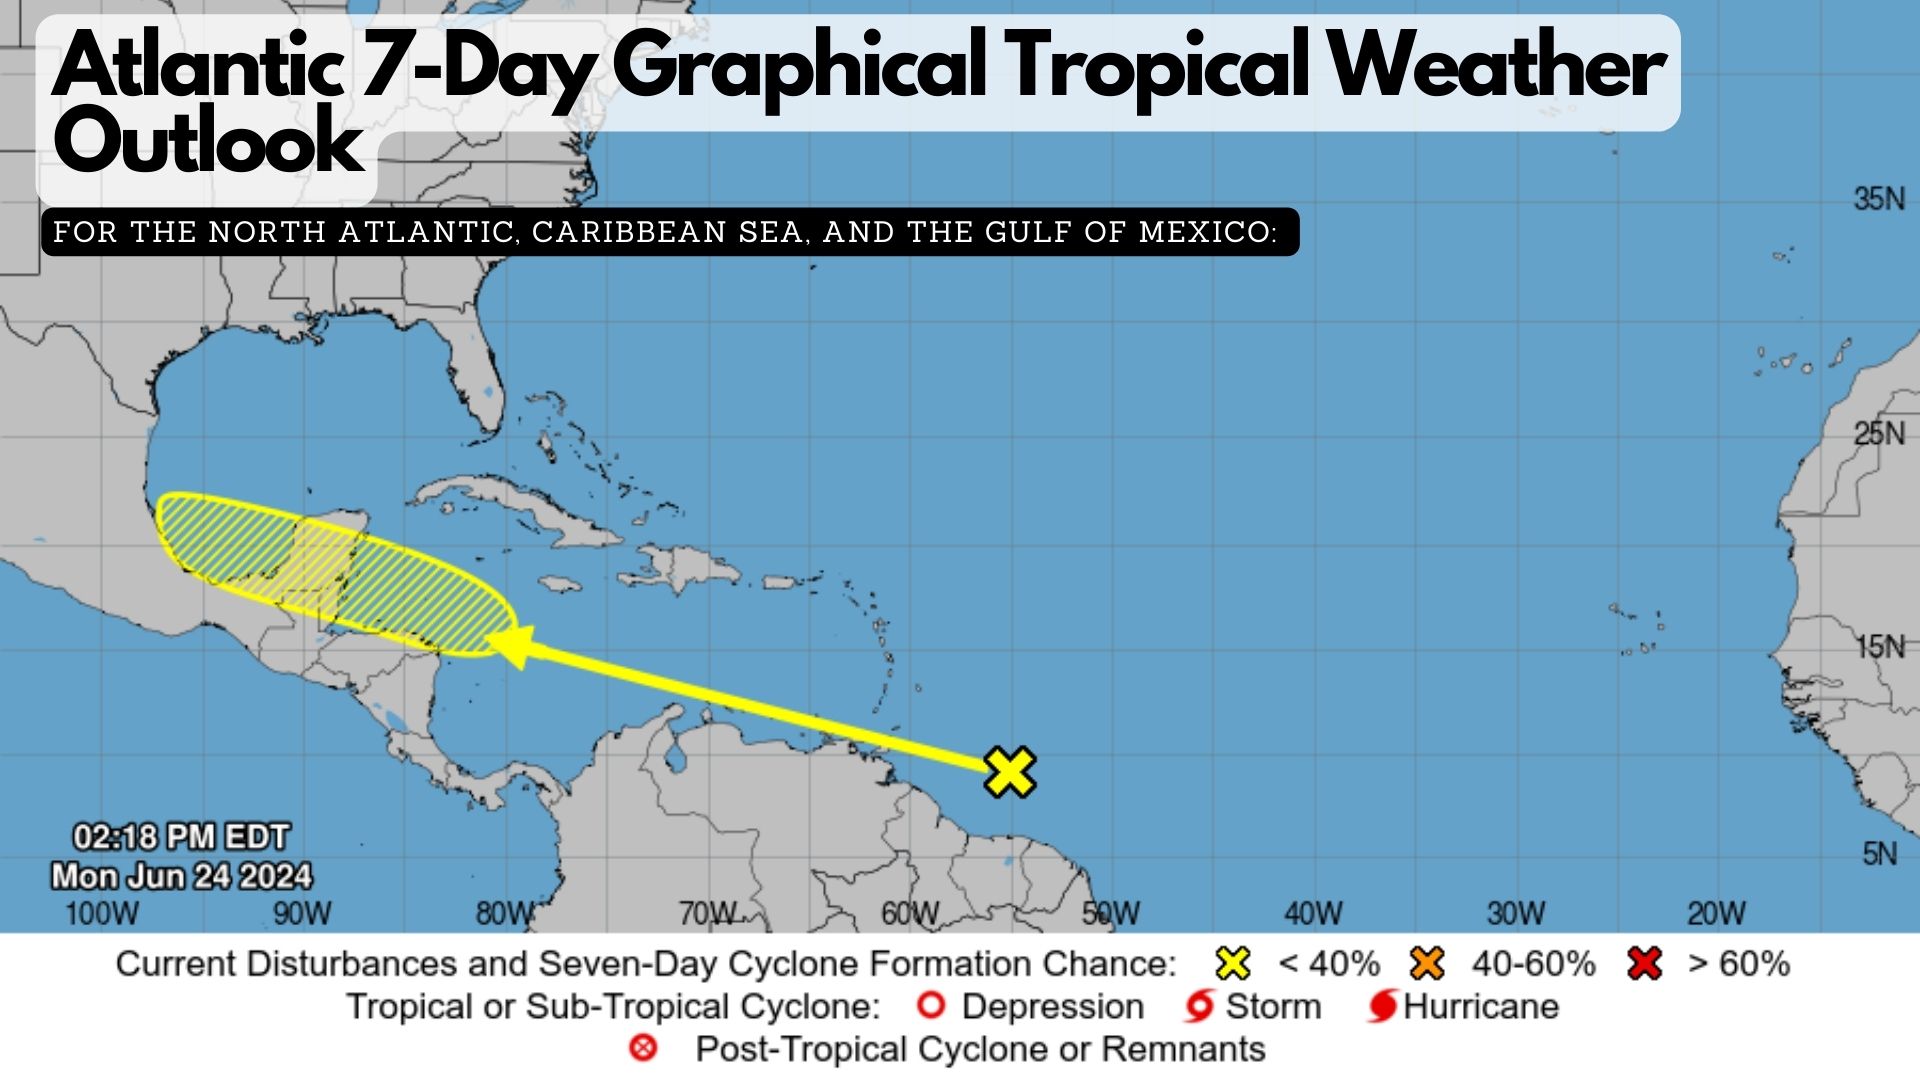 Atlantic 7-Day Graphical Tropical Weather Outlook